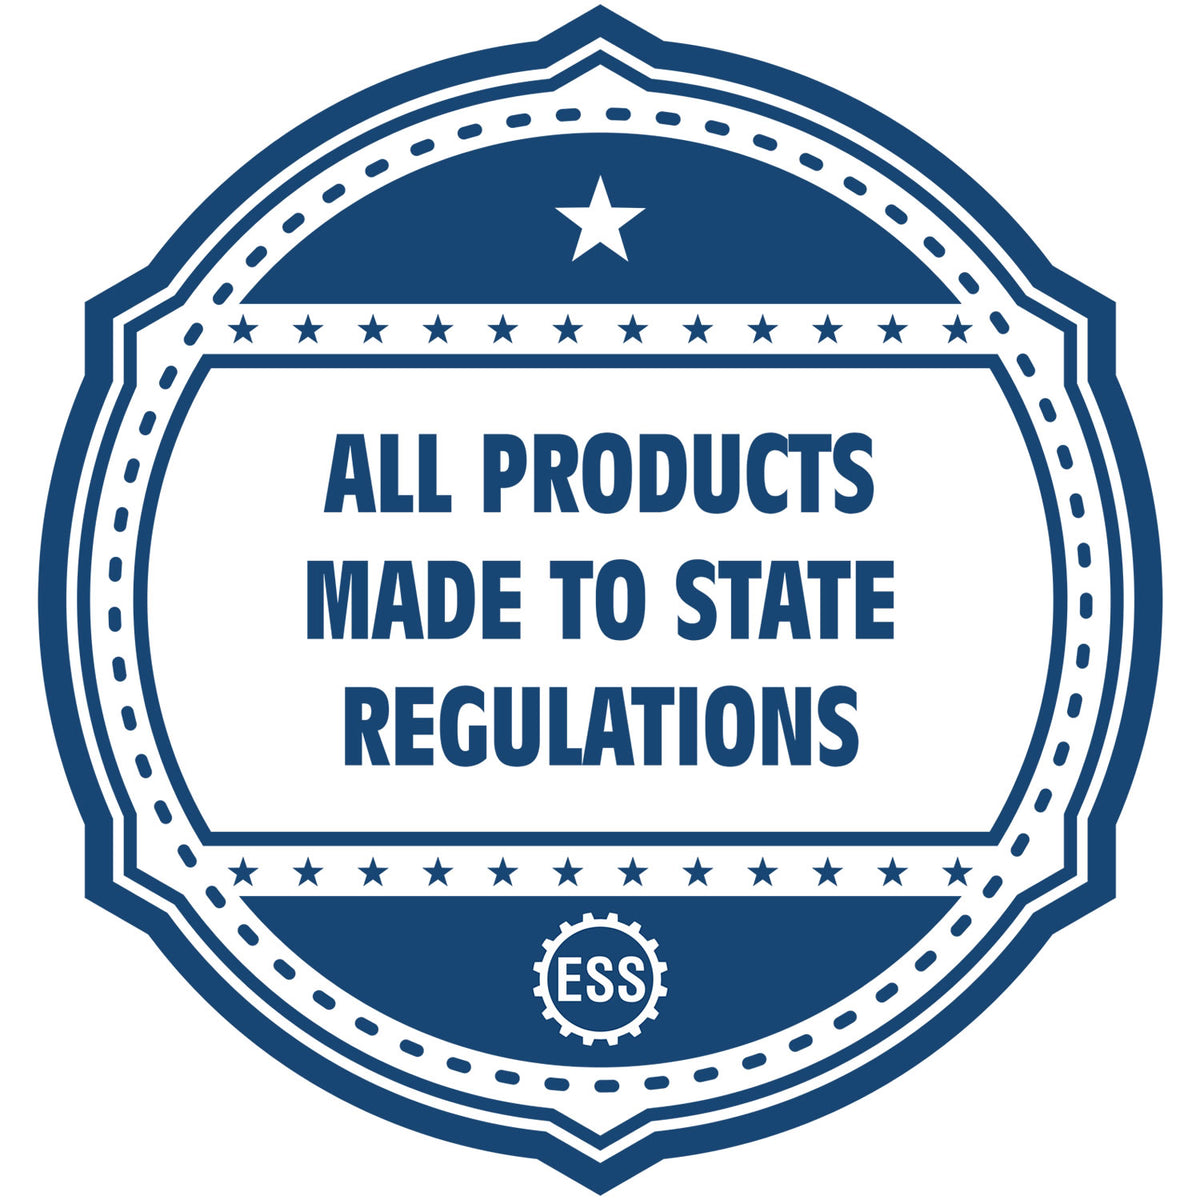 An icon or badge element for the Wooden Handle New Jersey State Seal Notary Public Stamp showing that this product is made in compliance with state regulations.